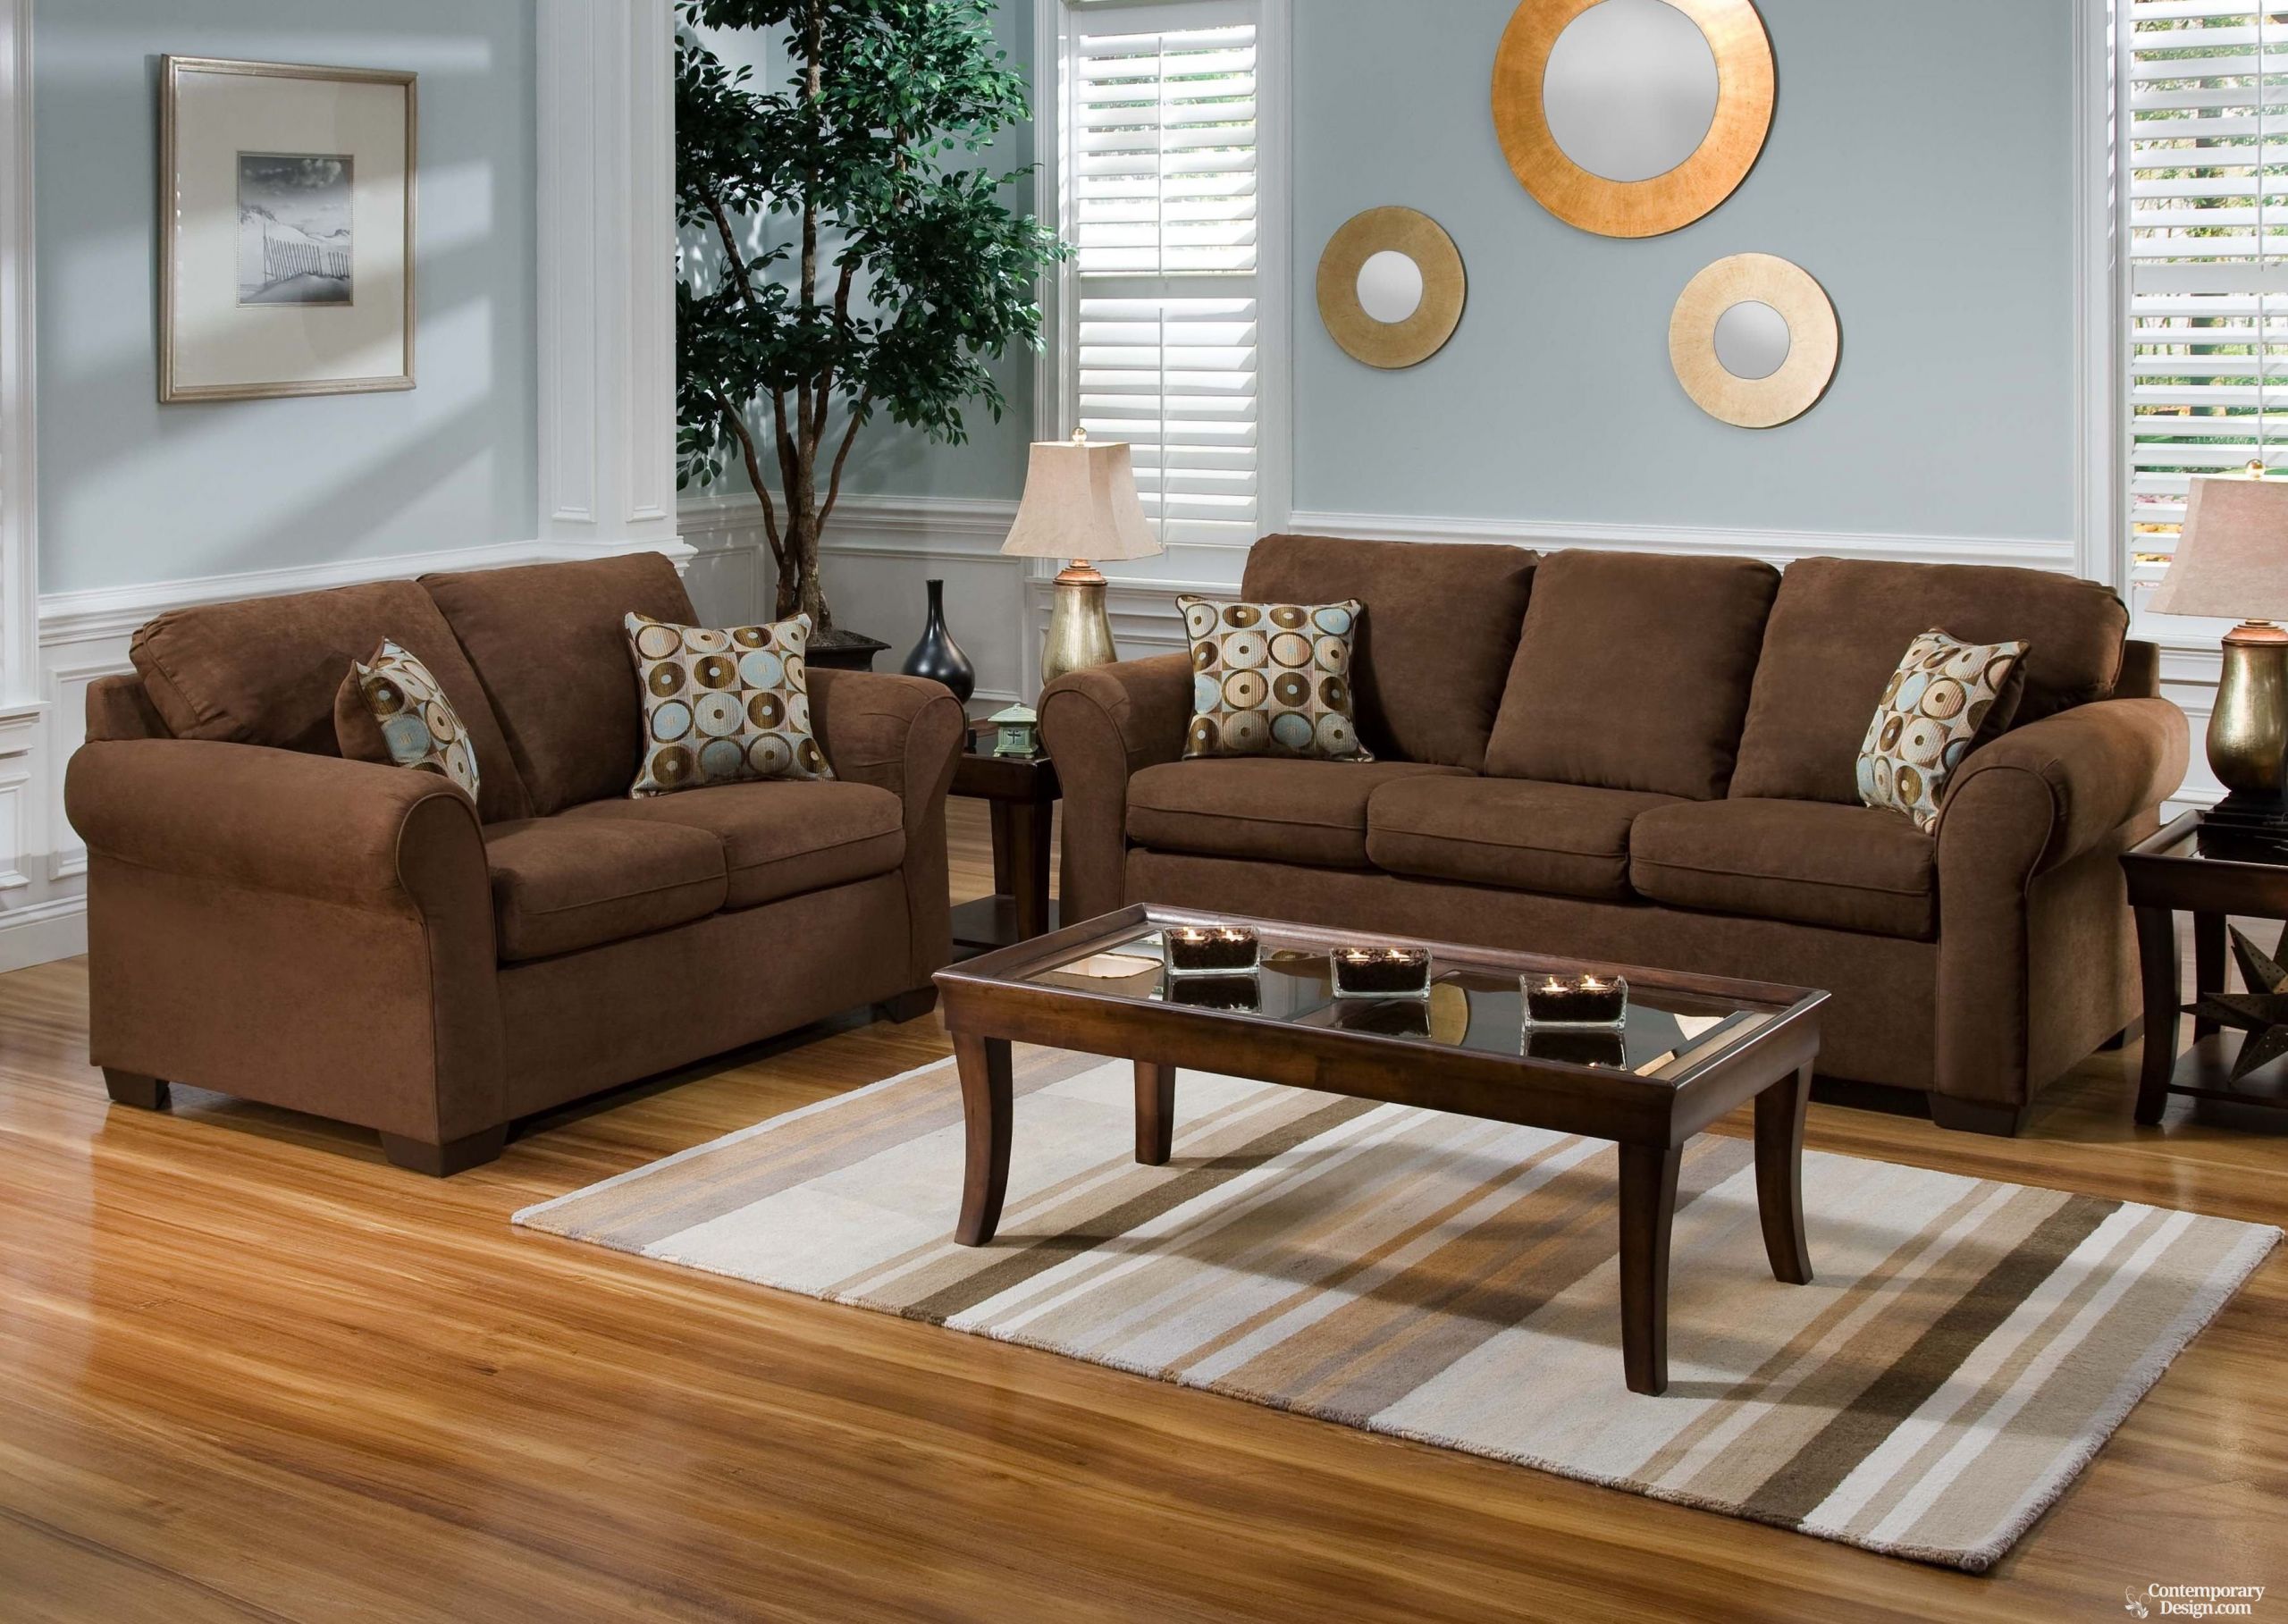 Brown Paint Living Room
 Living room paint color ideas with brown furniture